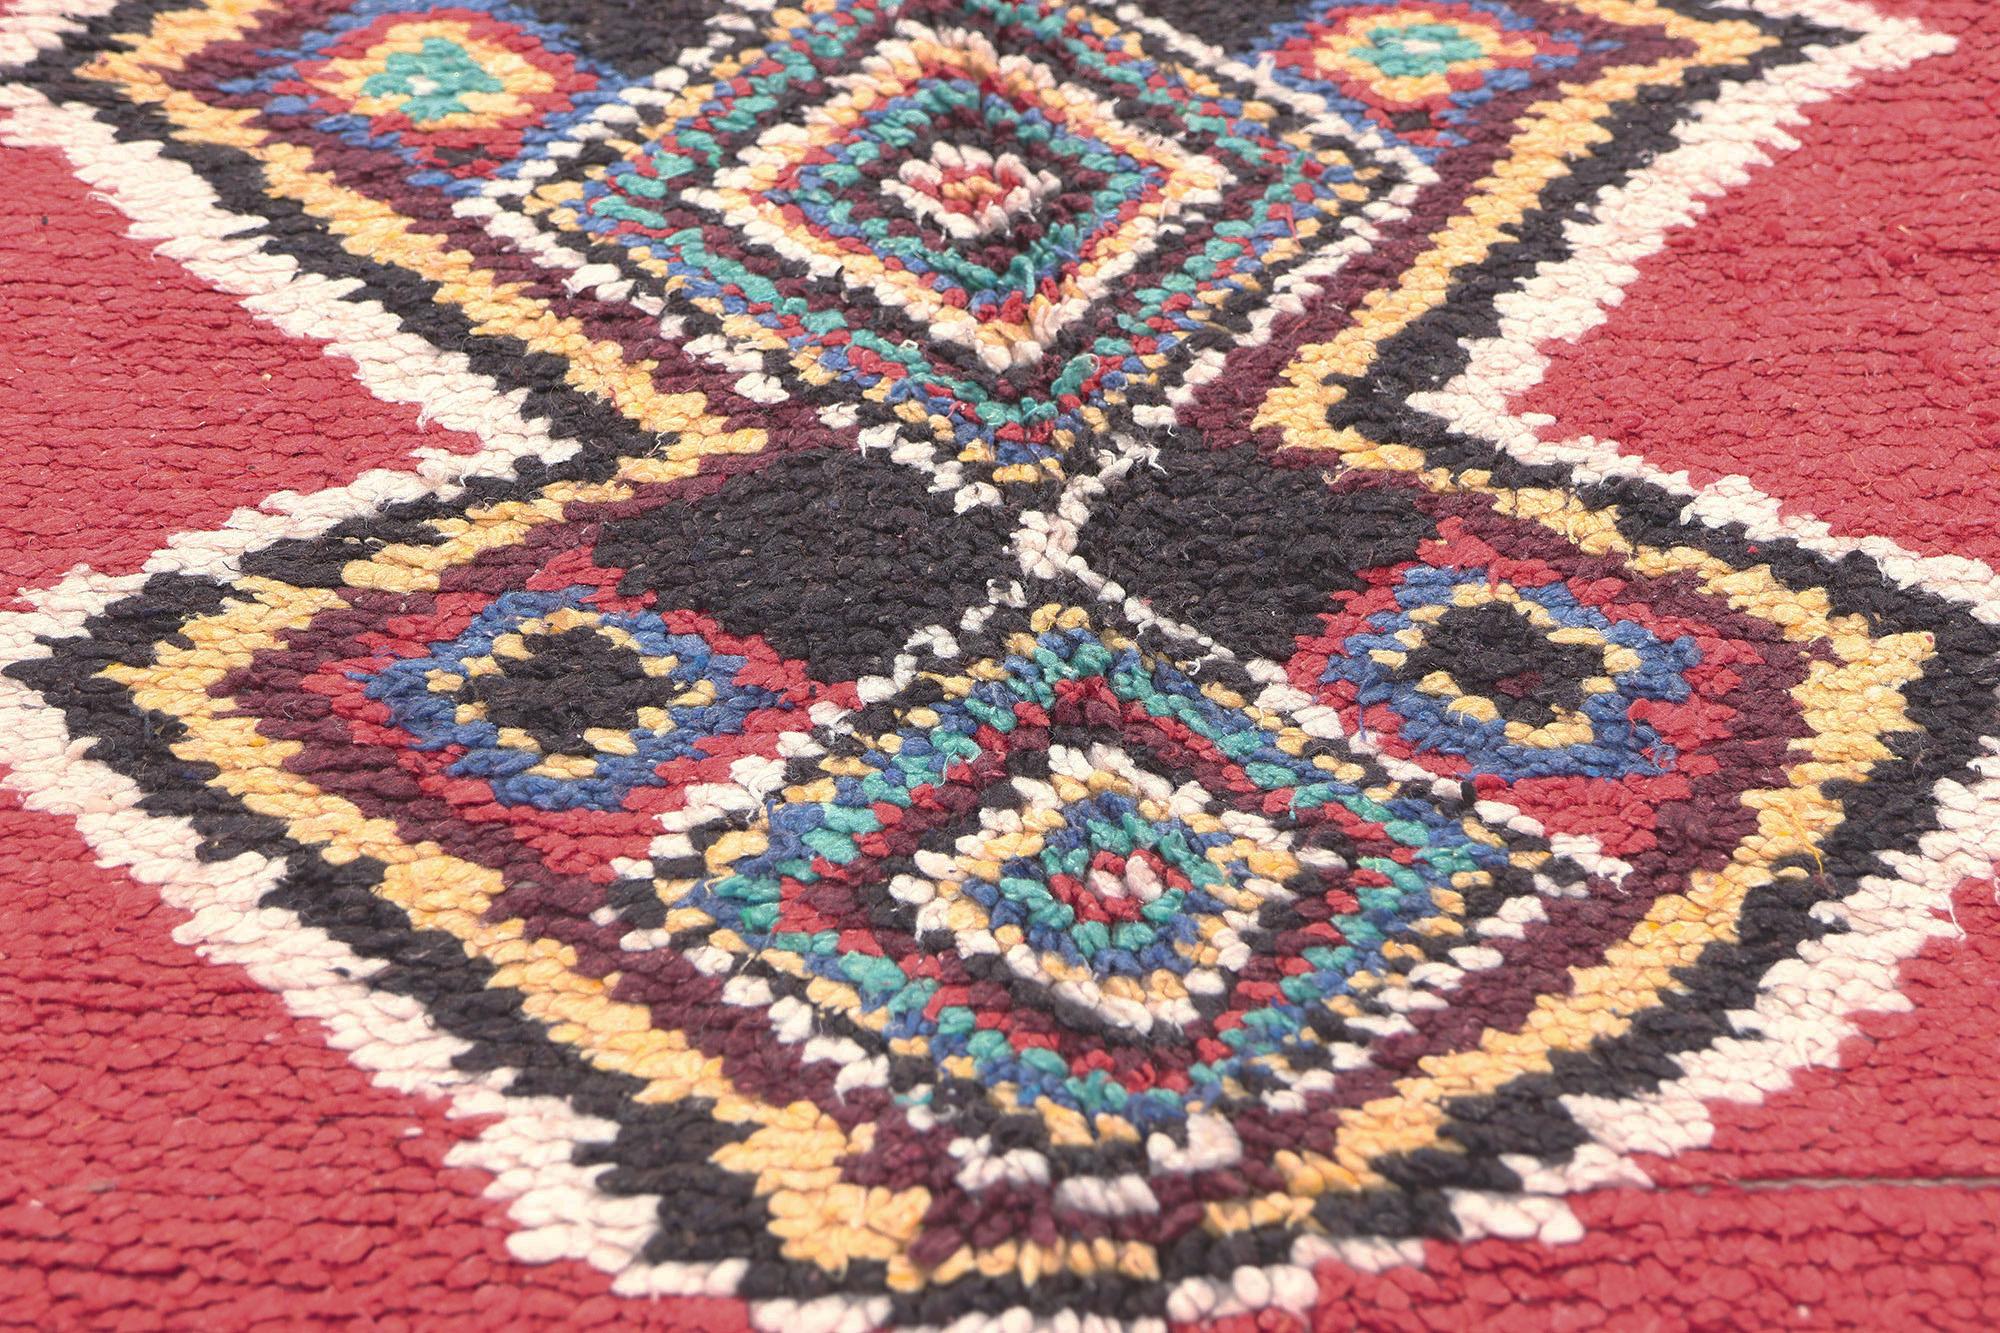 20th Century Vintage Red Moroccan Rug with Tribal Style by Berber Tribes of Morocco For Sale